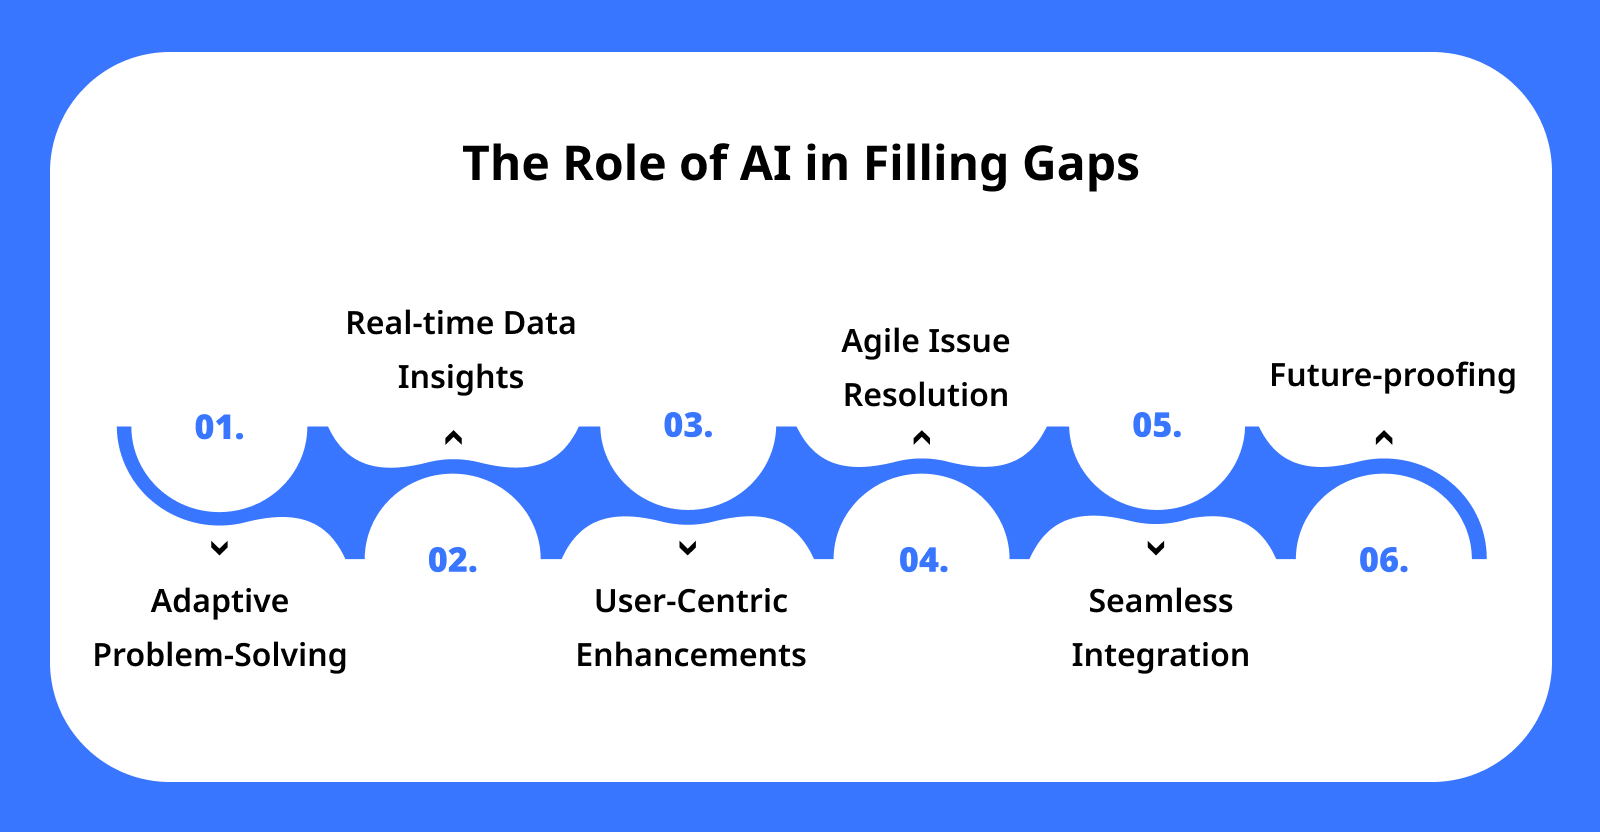 The Role of AI in Filling Gaps - software deployment and AI